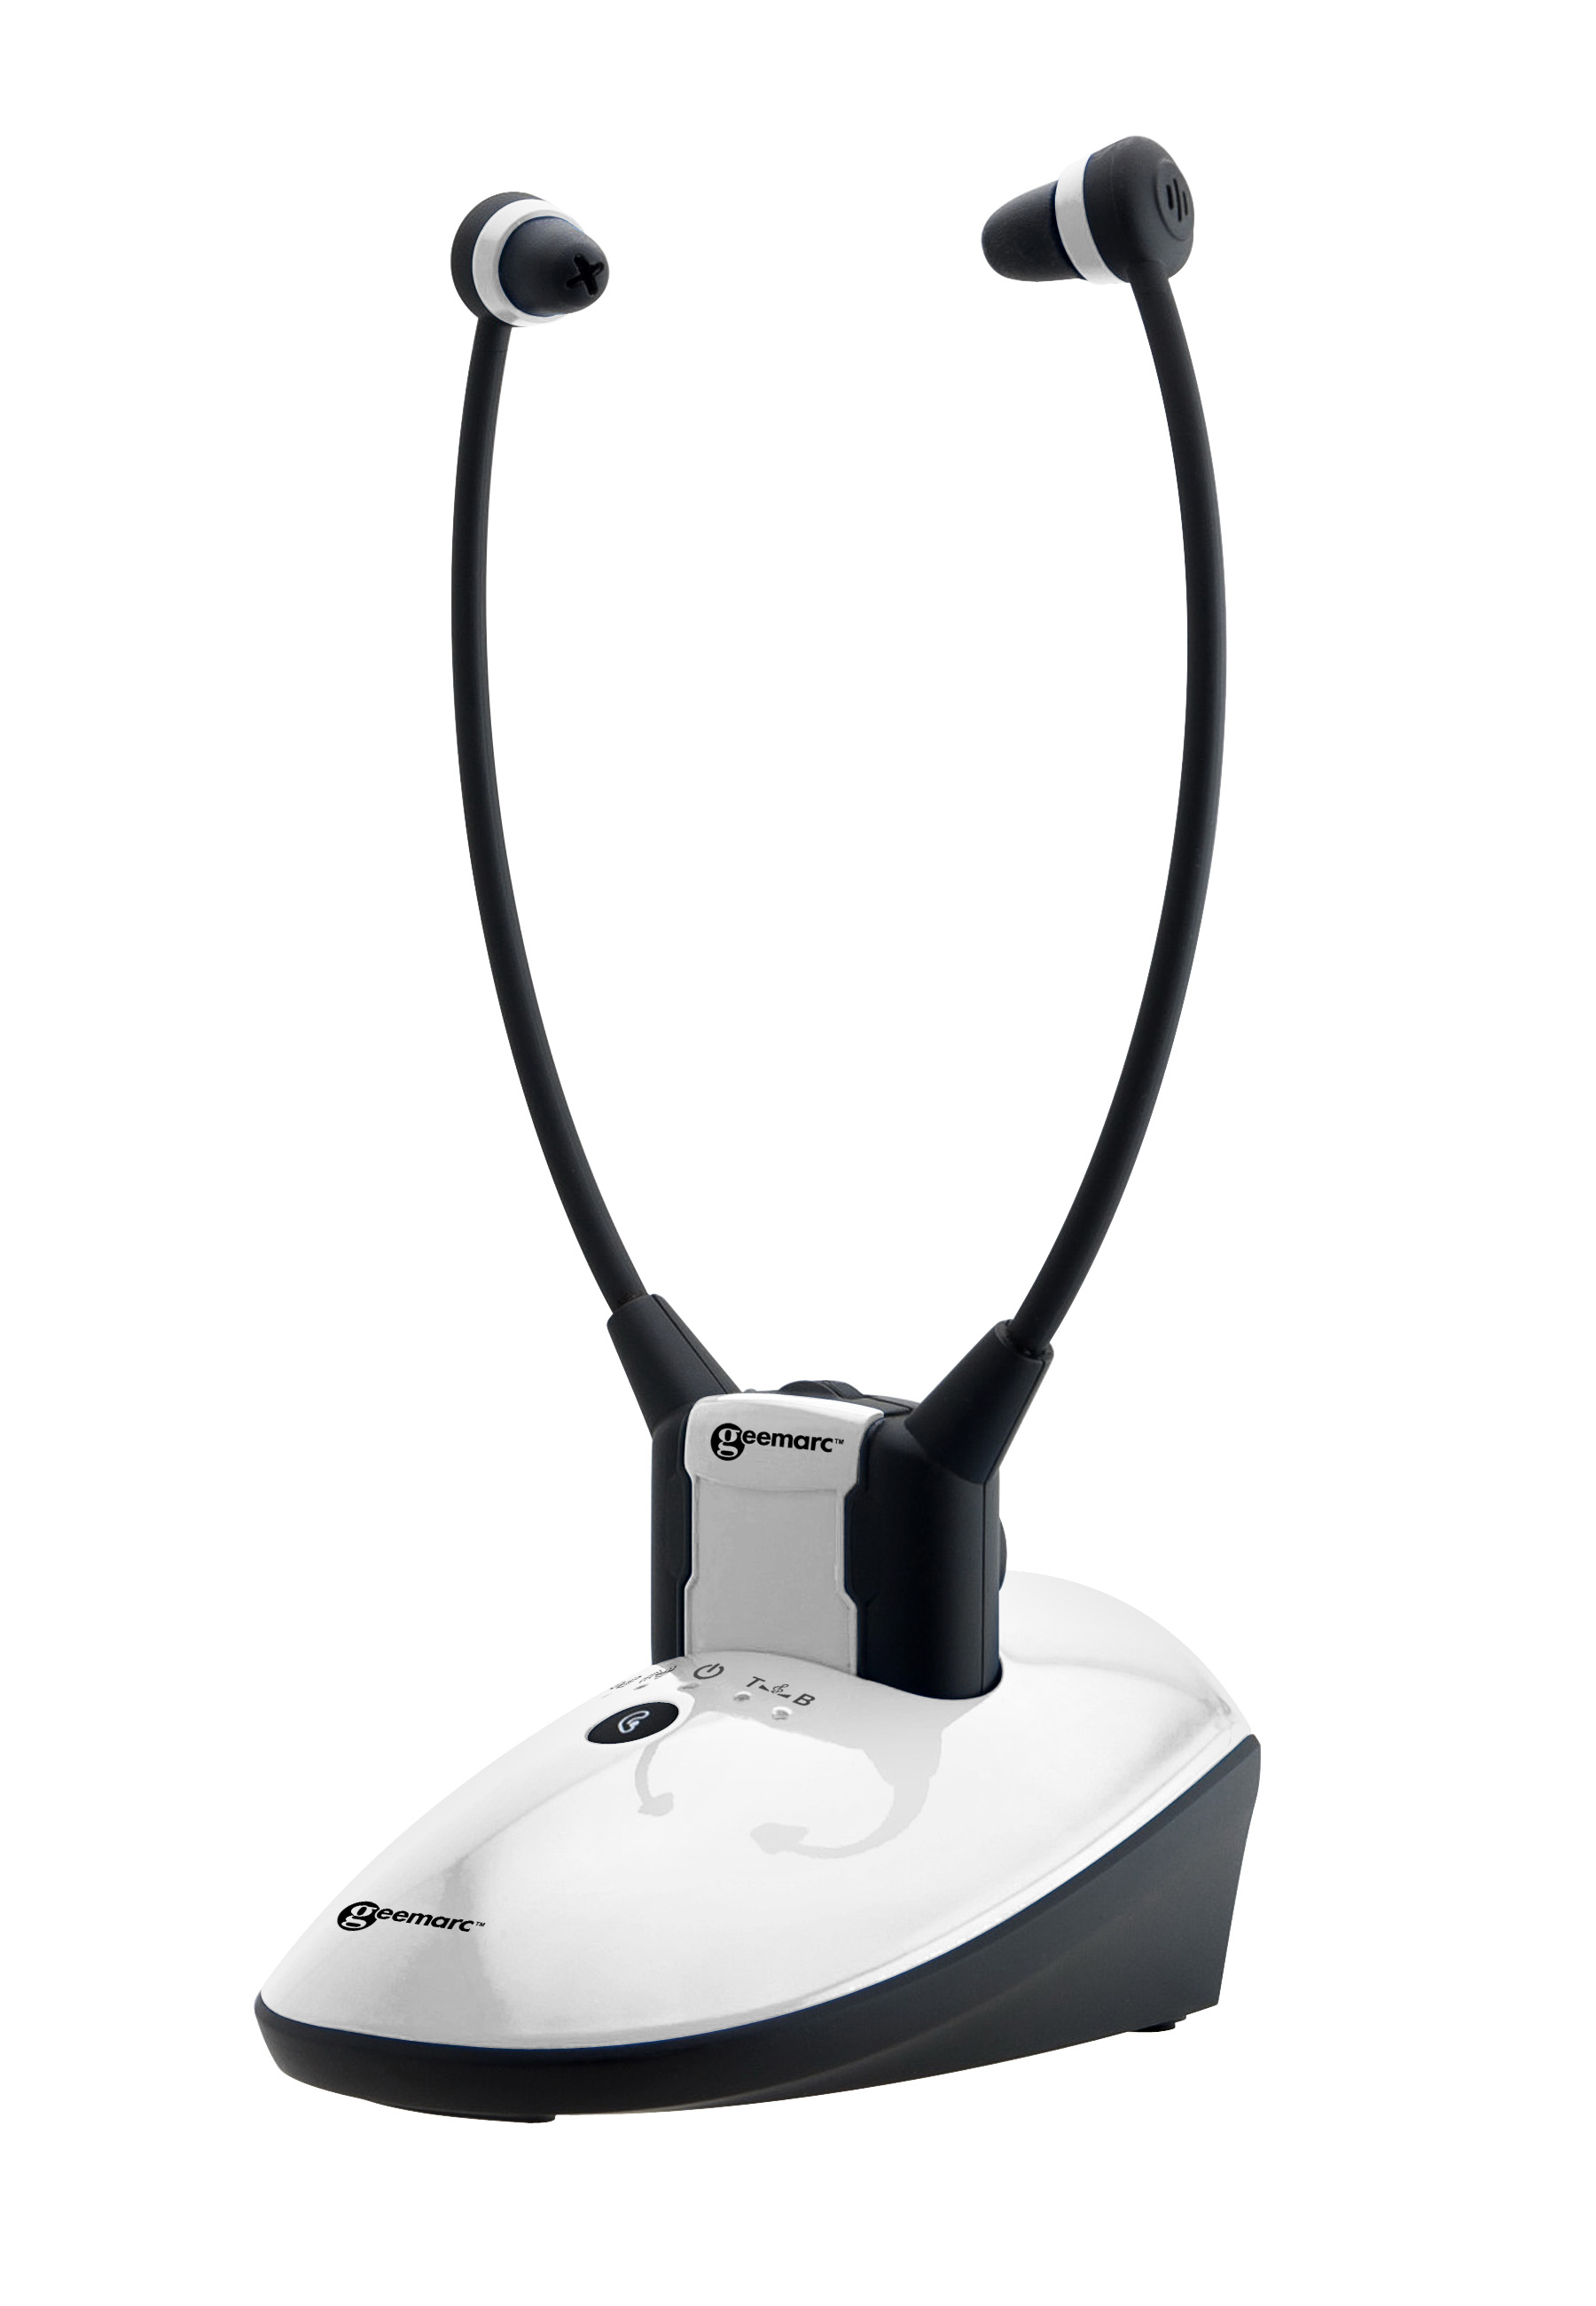 The Geemarc CL7350/STETHO Amplified TV Headset allows those with hearing loss to enjoy watching TV without cranking the volume and disturbing others.